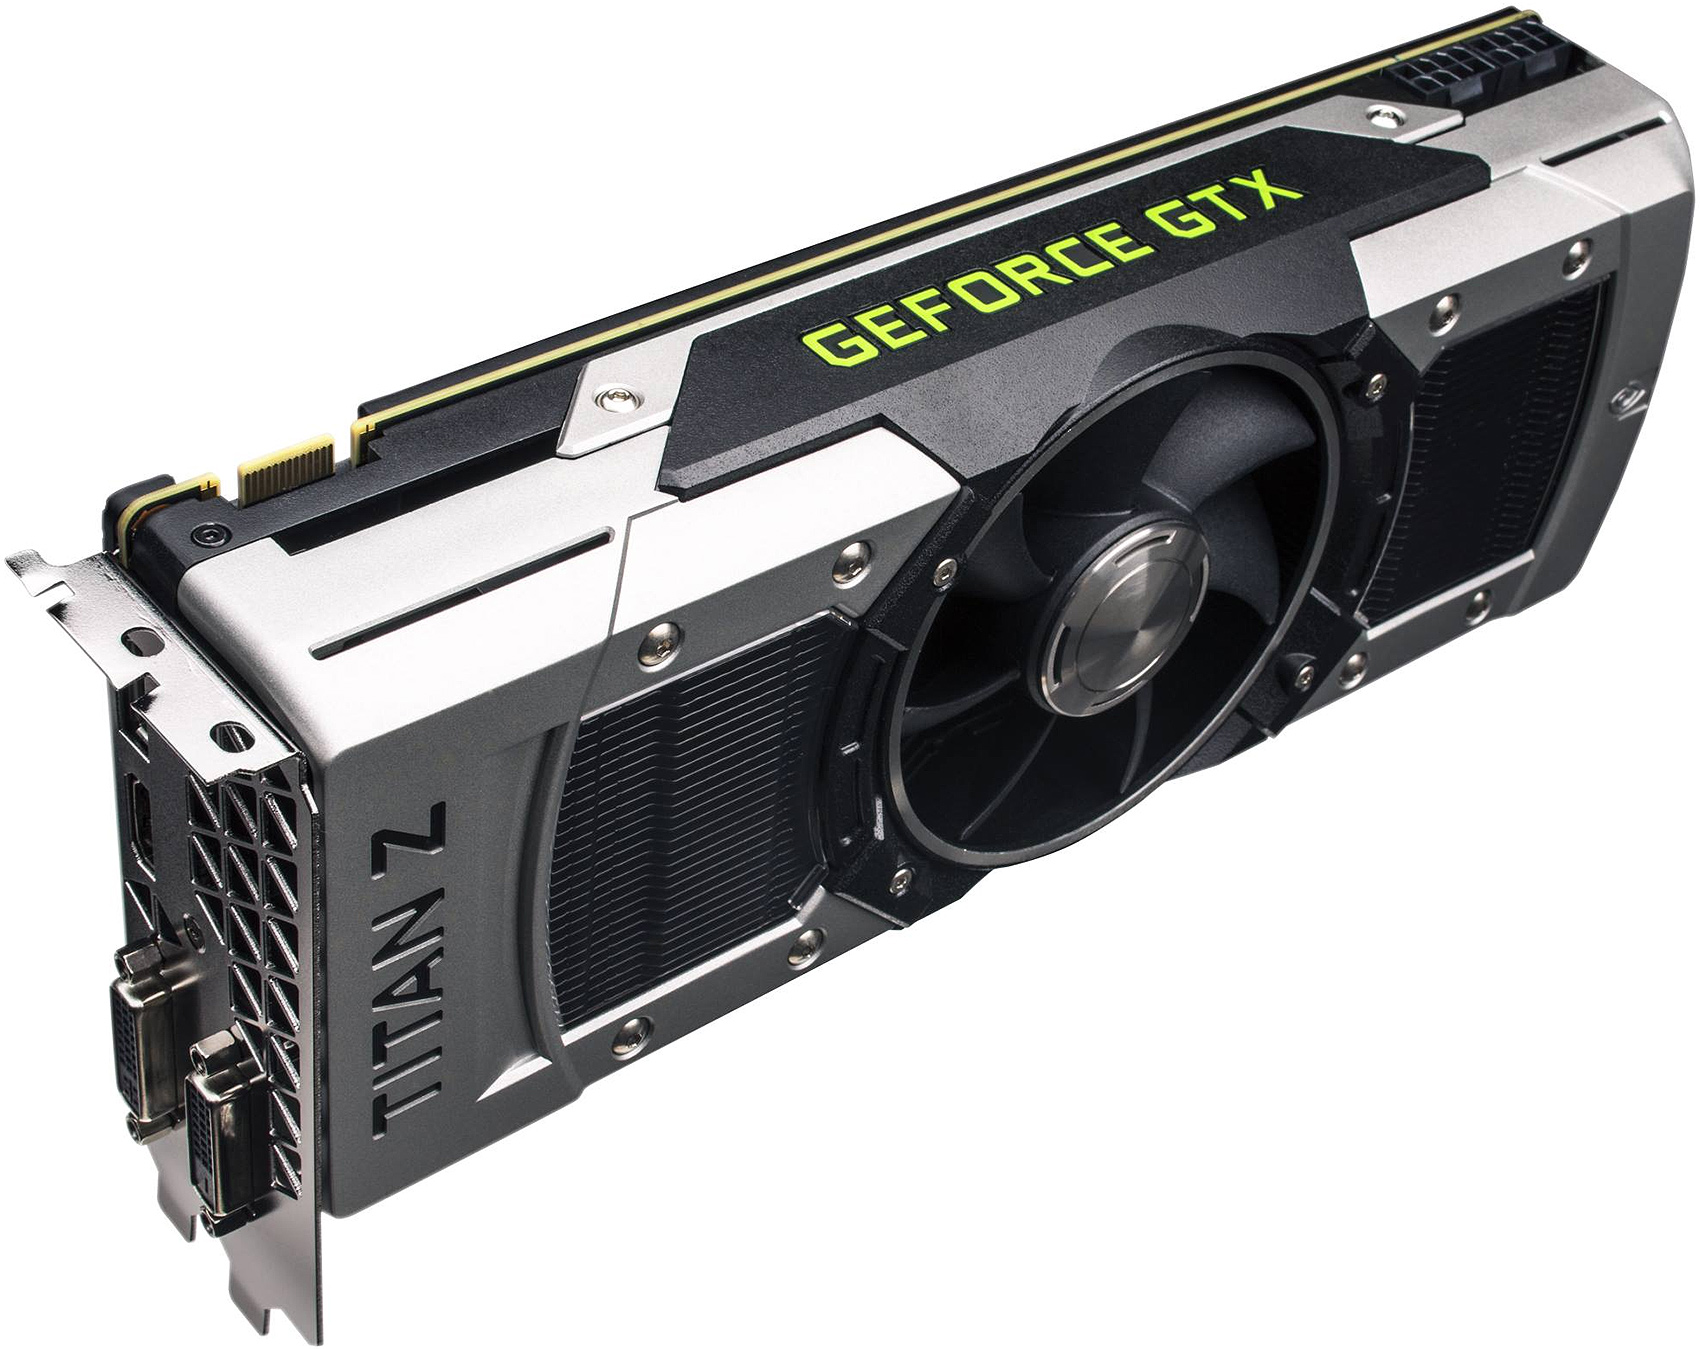 Nvidia quietly begins to slash price of GeForce GTX Titan Z for PC